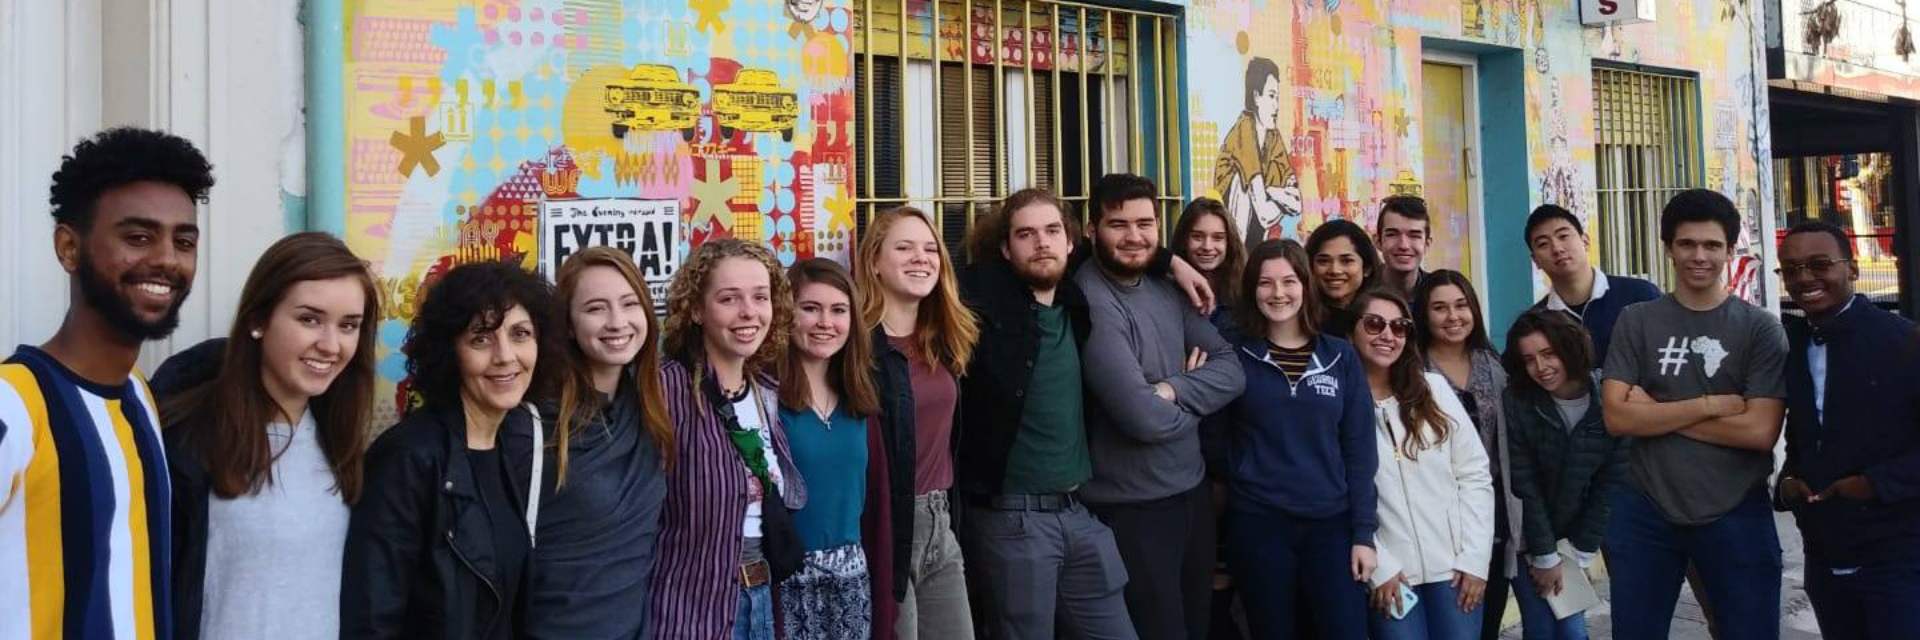 Georgia Tech students in front of a mural